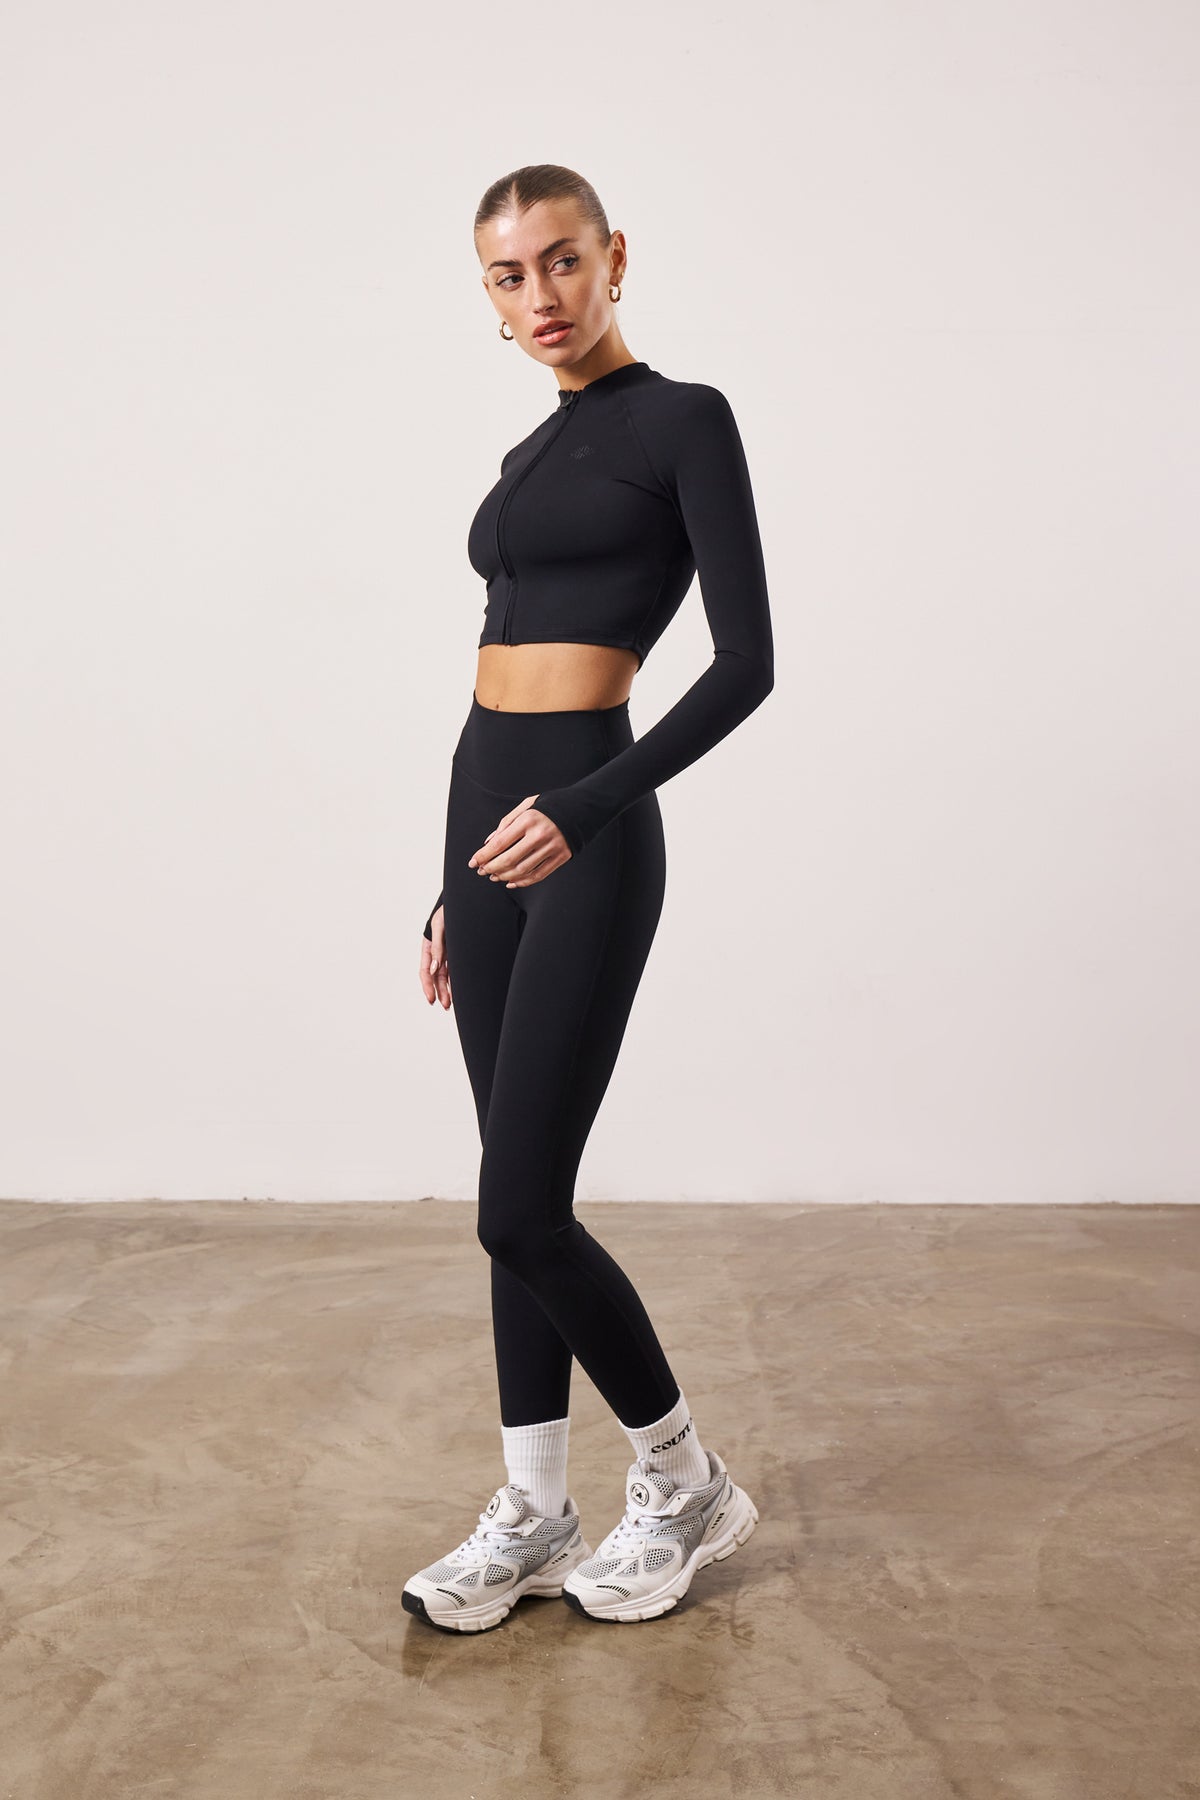 EMBLEM SOFT TOUCH JERSEY LEGGINGS - BLACK – The Couture Club